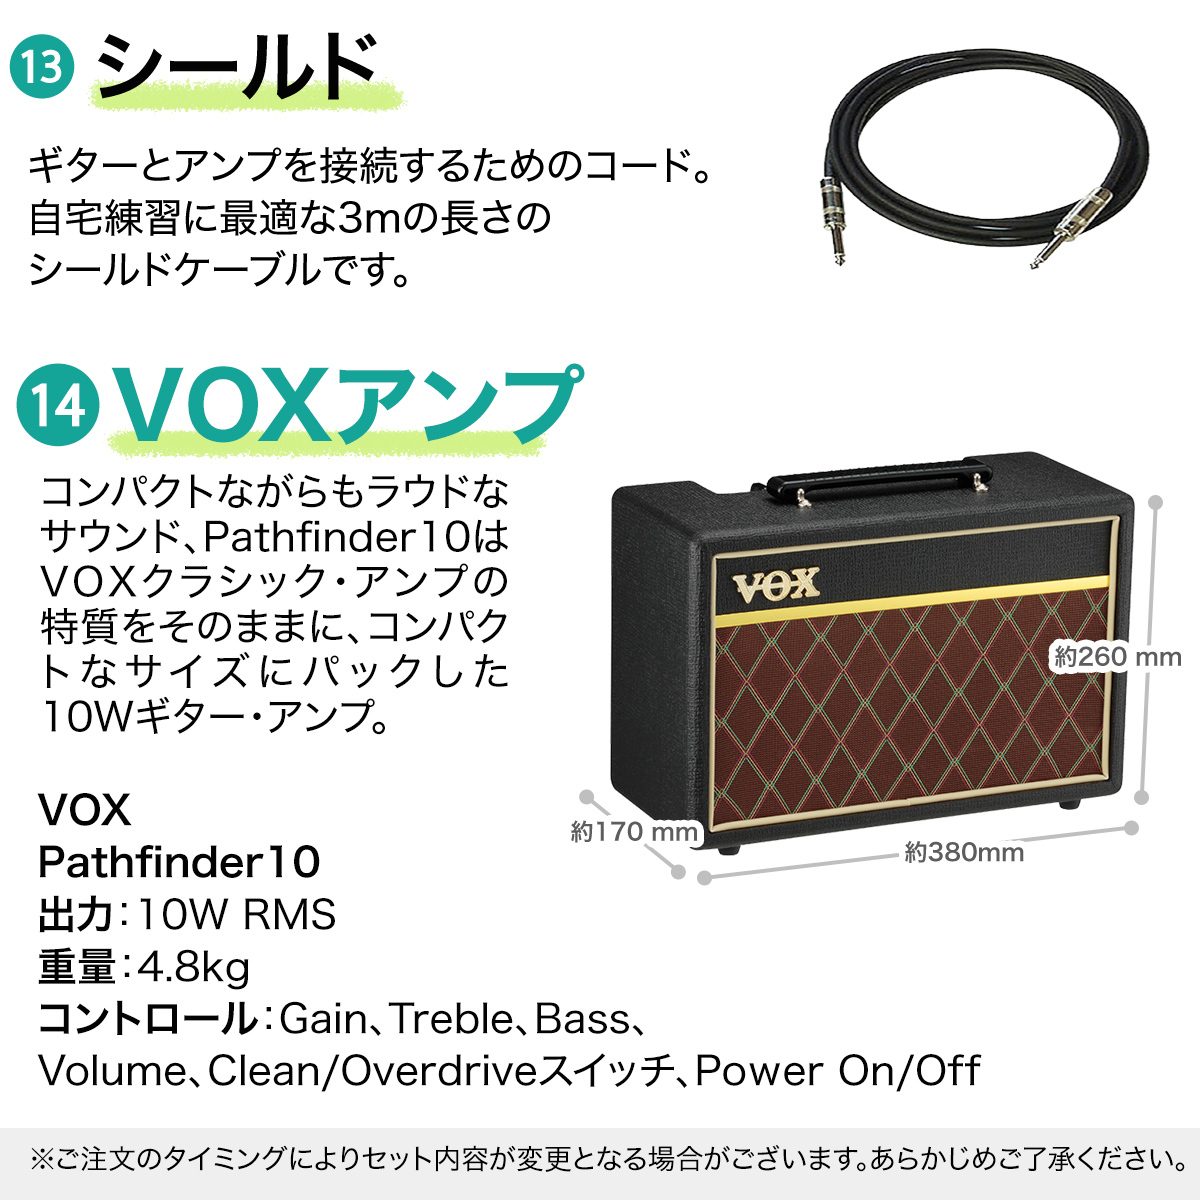 Epiphone Power Players SG IBL エレキギター初心者14点セット【VOX 